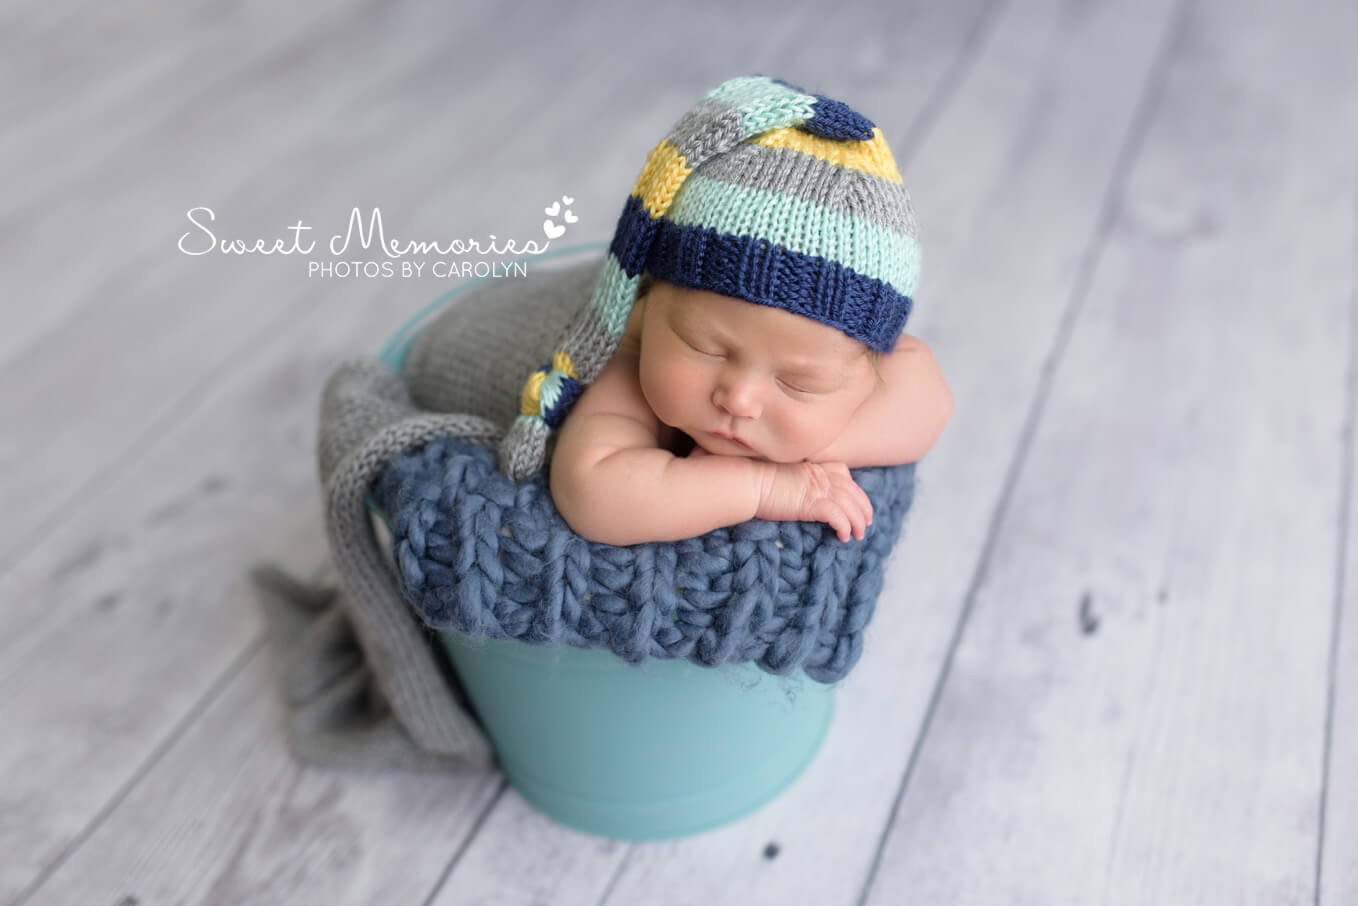 baby boy wearing blue and gray striped hat in chin on hands bucket pose